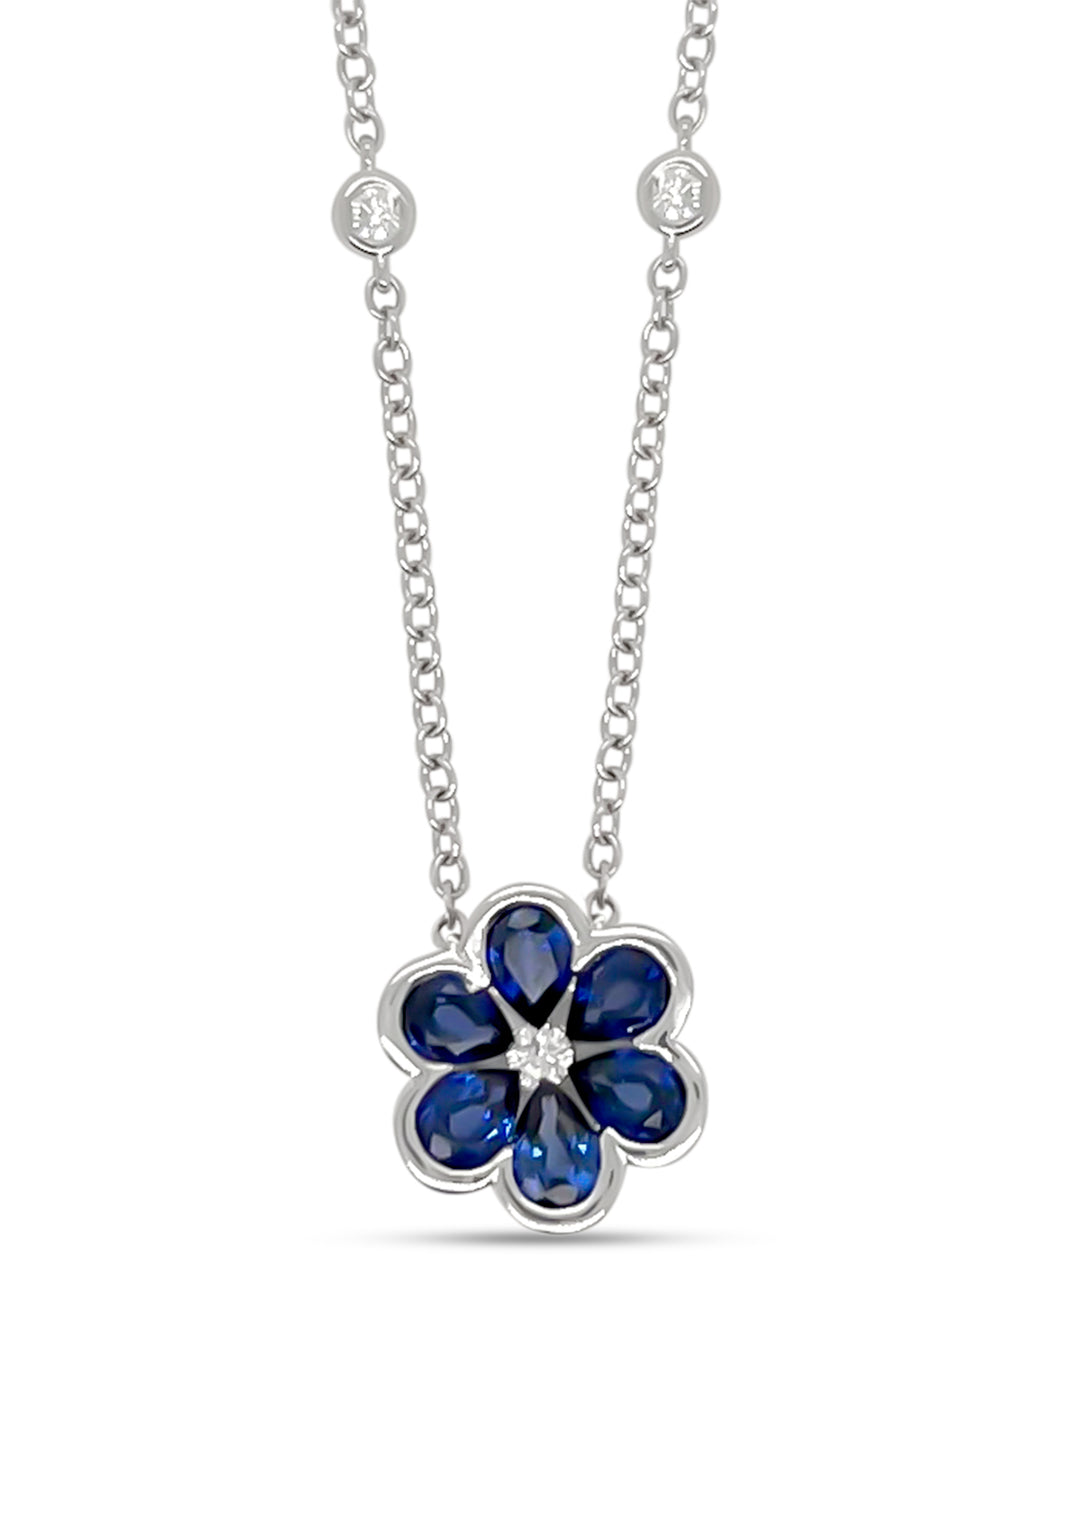 18K White Gold 0.94 Carat Sapphire And Diamond Flower Necklace